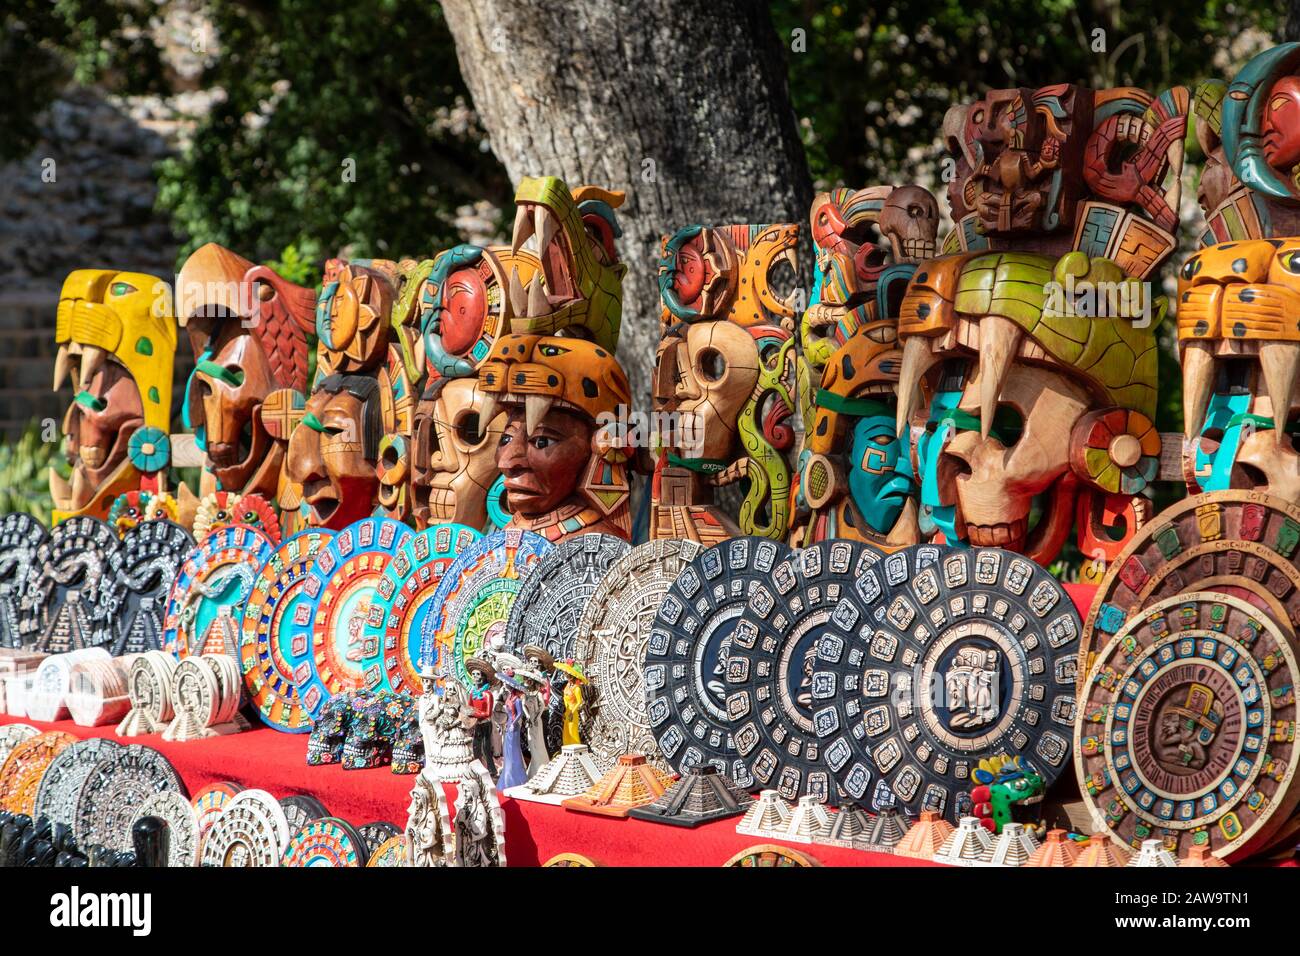 Typical carved wooden souvenirs at a local Mexican market in Chichen Itza, Yucatan Peninsula, Mexico. Stock Photo